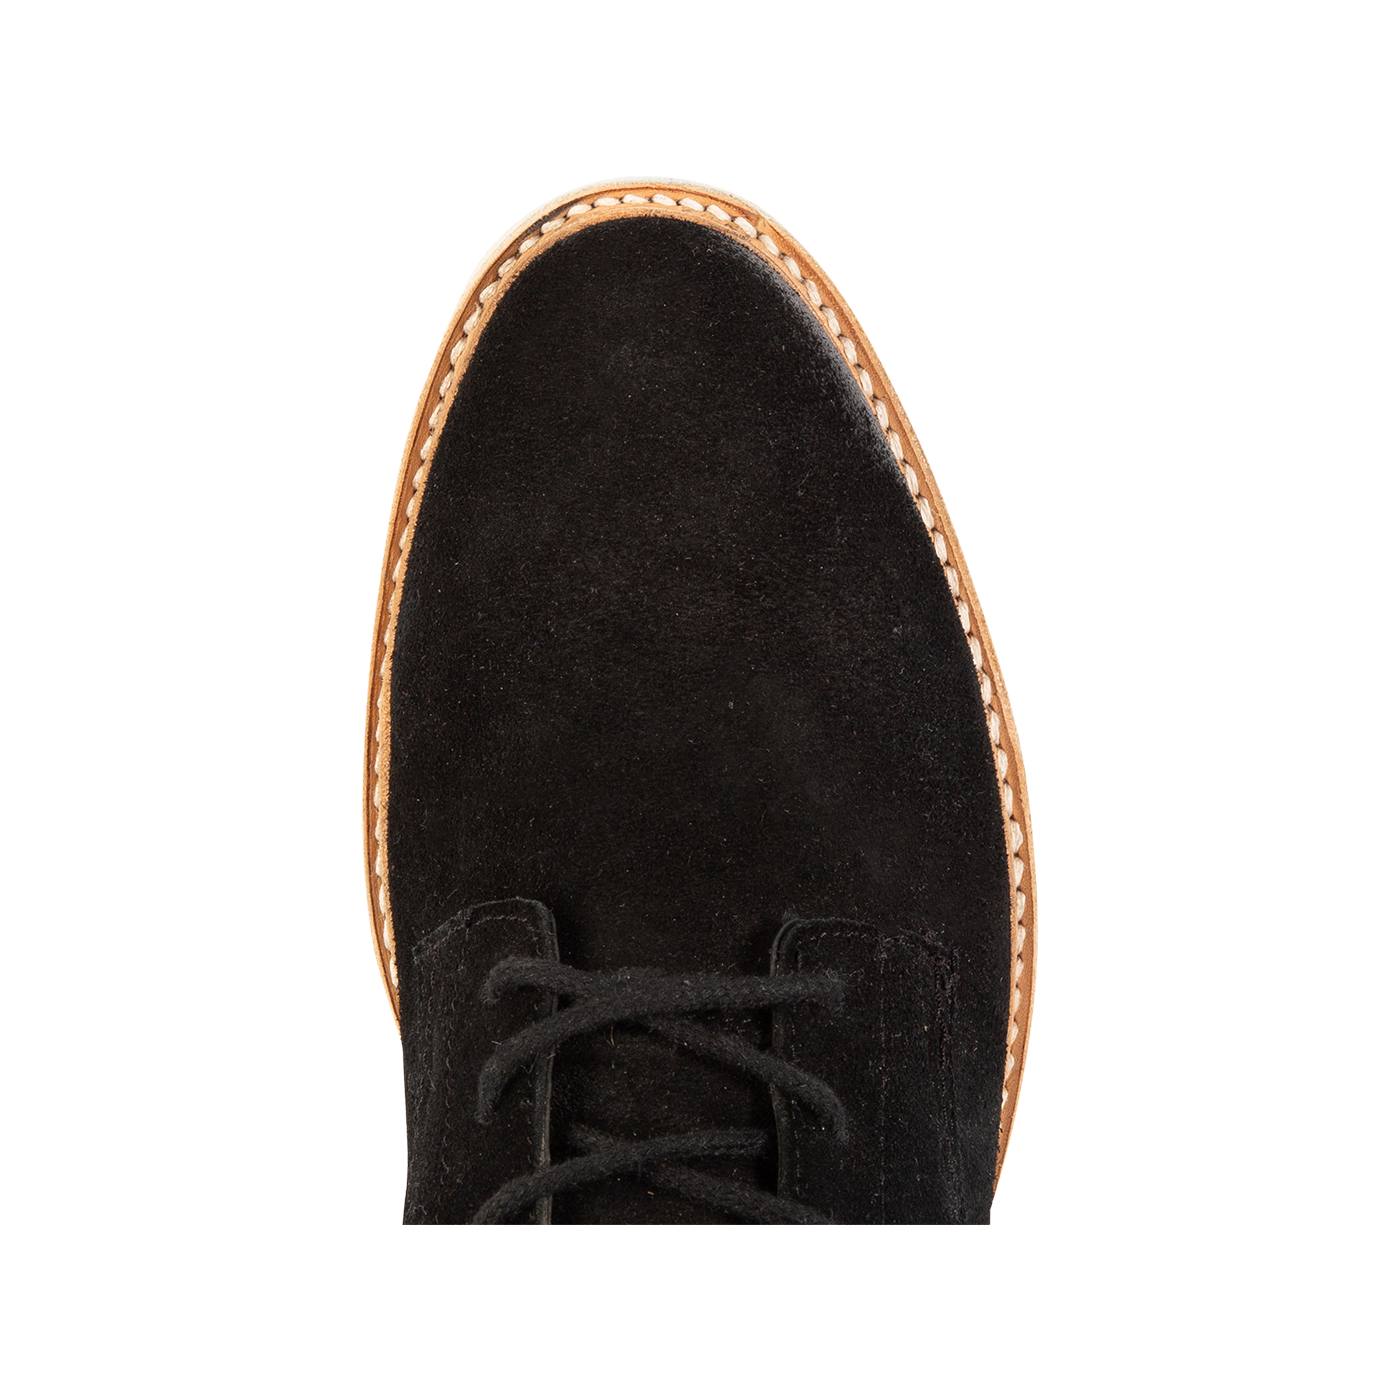 Top view showing almond toe and suede upper on FREEBIRD men's Wheeler black suede shoe